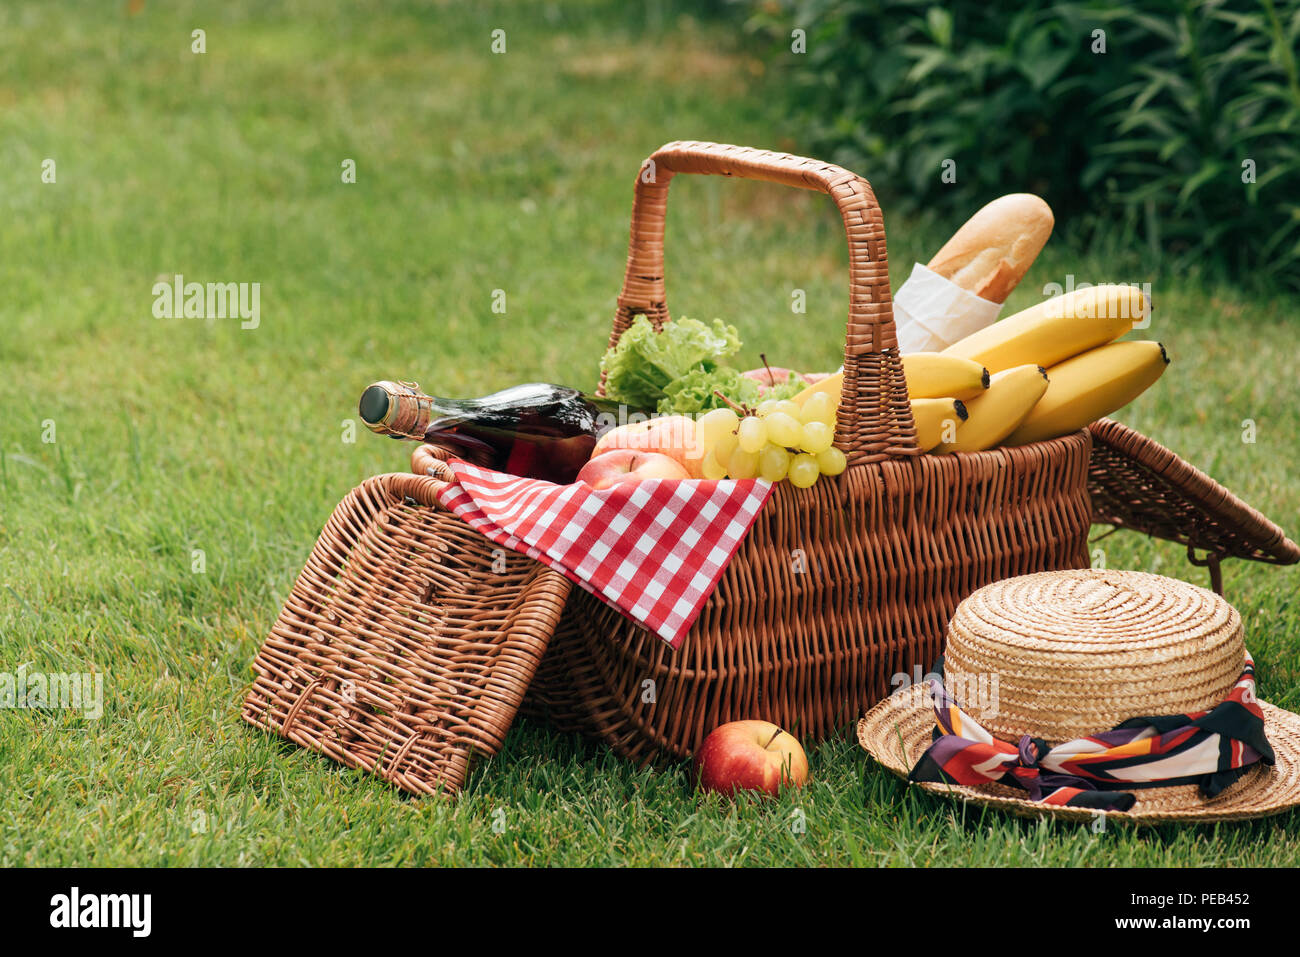 yummy fruits and bottle of champagne in wicker basket on green grass at picnic Stock Photo